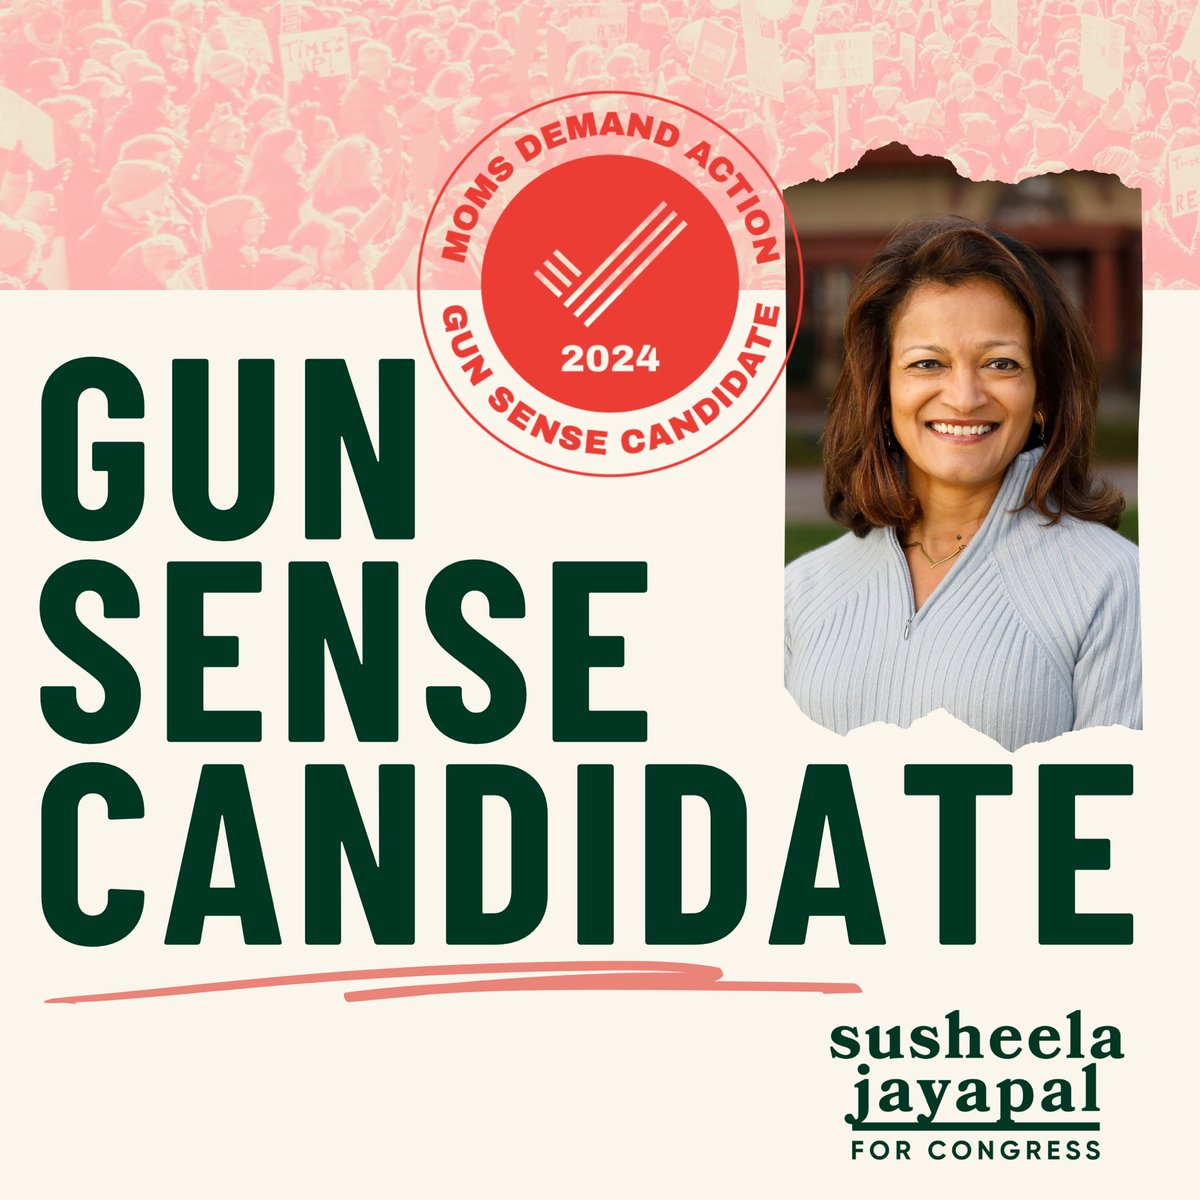 Honored to be awarded the 2024 @MomsDemand Action Gun Sense Candidate distinction.

I am committed to supporting stronger gun laws and advocating for safer communities, in Oregon and across the U.S. #GunSafety #GunSenseCandidate